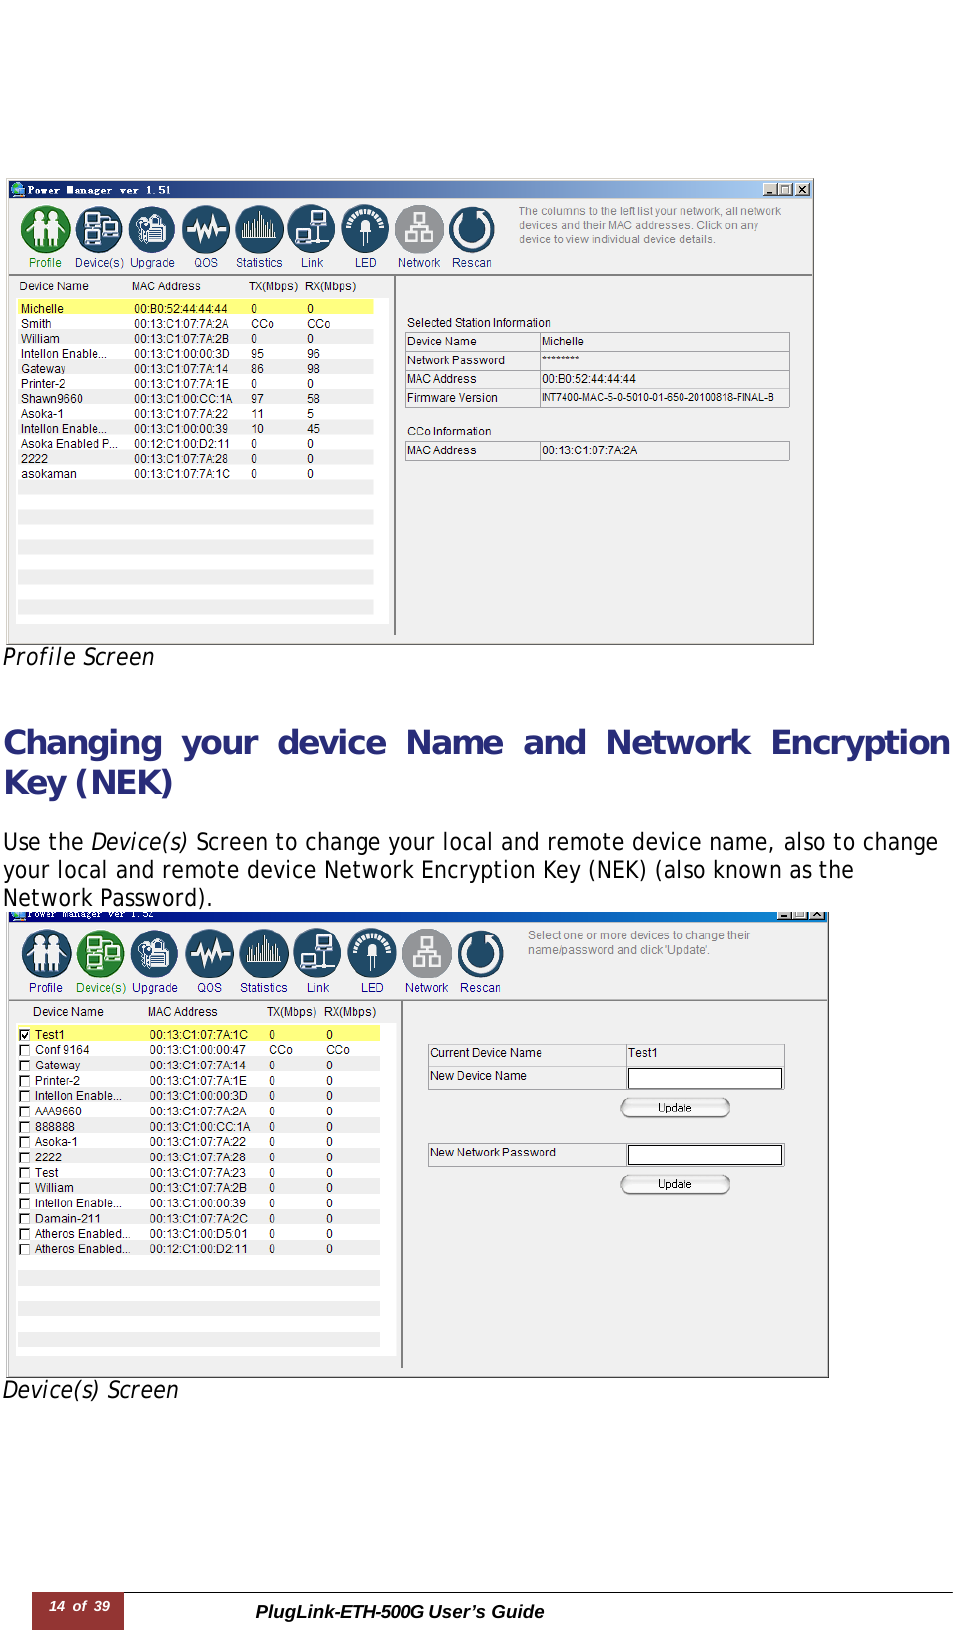 PlugLink-ETH-500G User’s Guide 14 of 39         Profile Screen  Changing your device Name and Network Encryption Key (NEK)  Use the Device(s) Screen to change your local and remote device name, also to change your local and remote device Network Encryption Key (NEK) (also known as the Network Password).  Device(s) Screen 